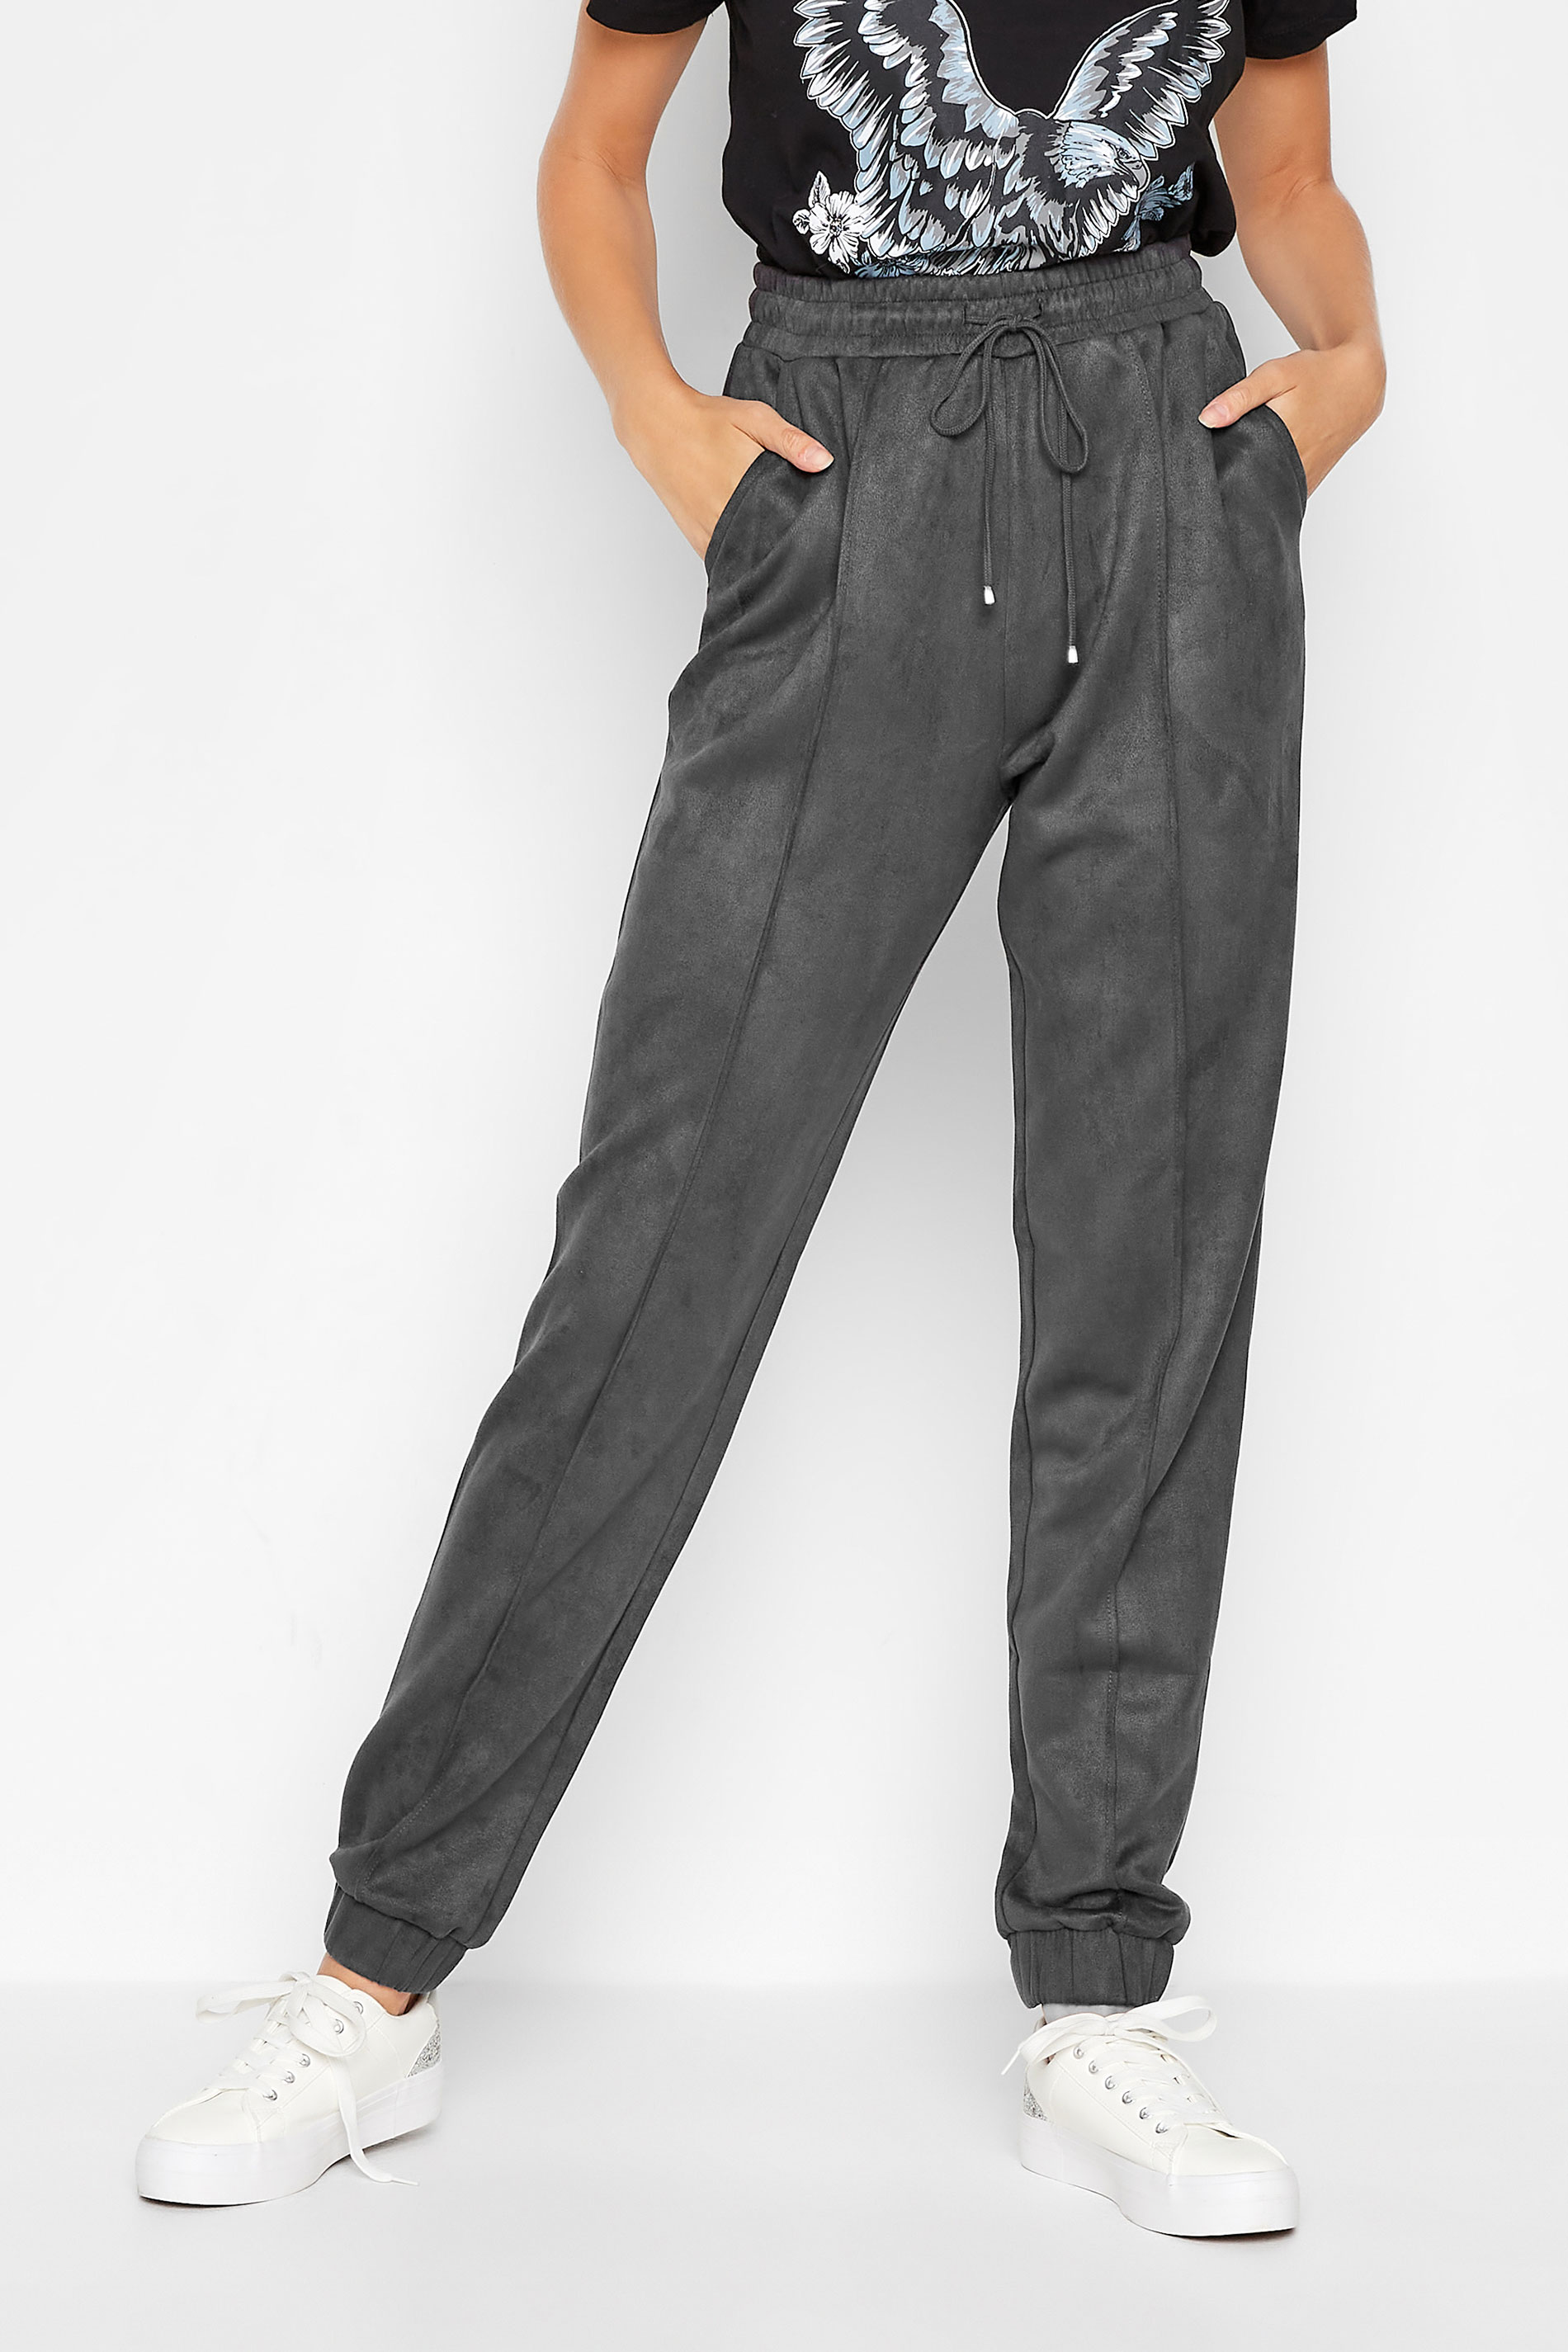 LTS Tall Women's Grey Faux Suede Joggers | Long Tall Sally 1